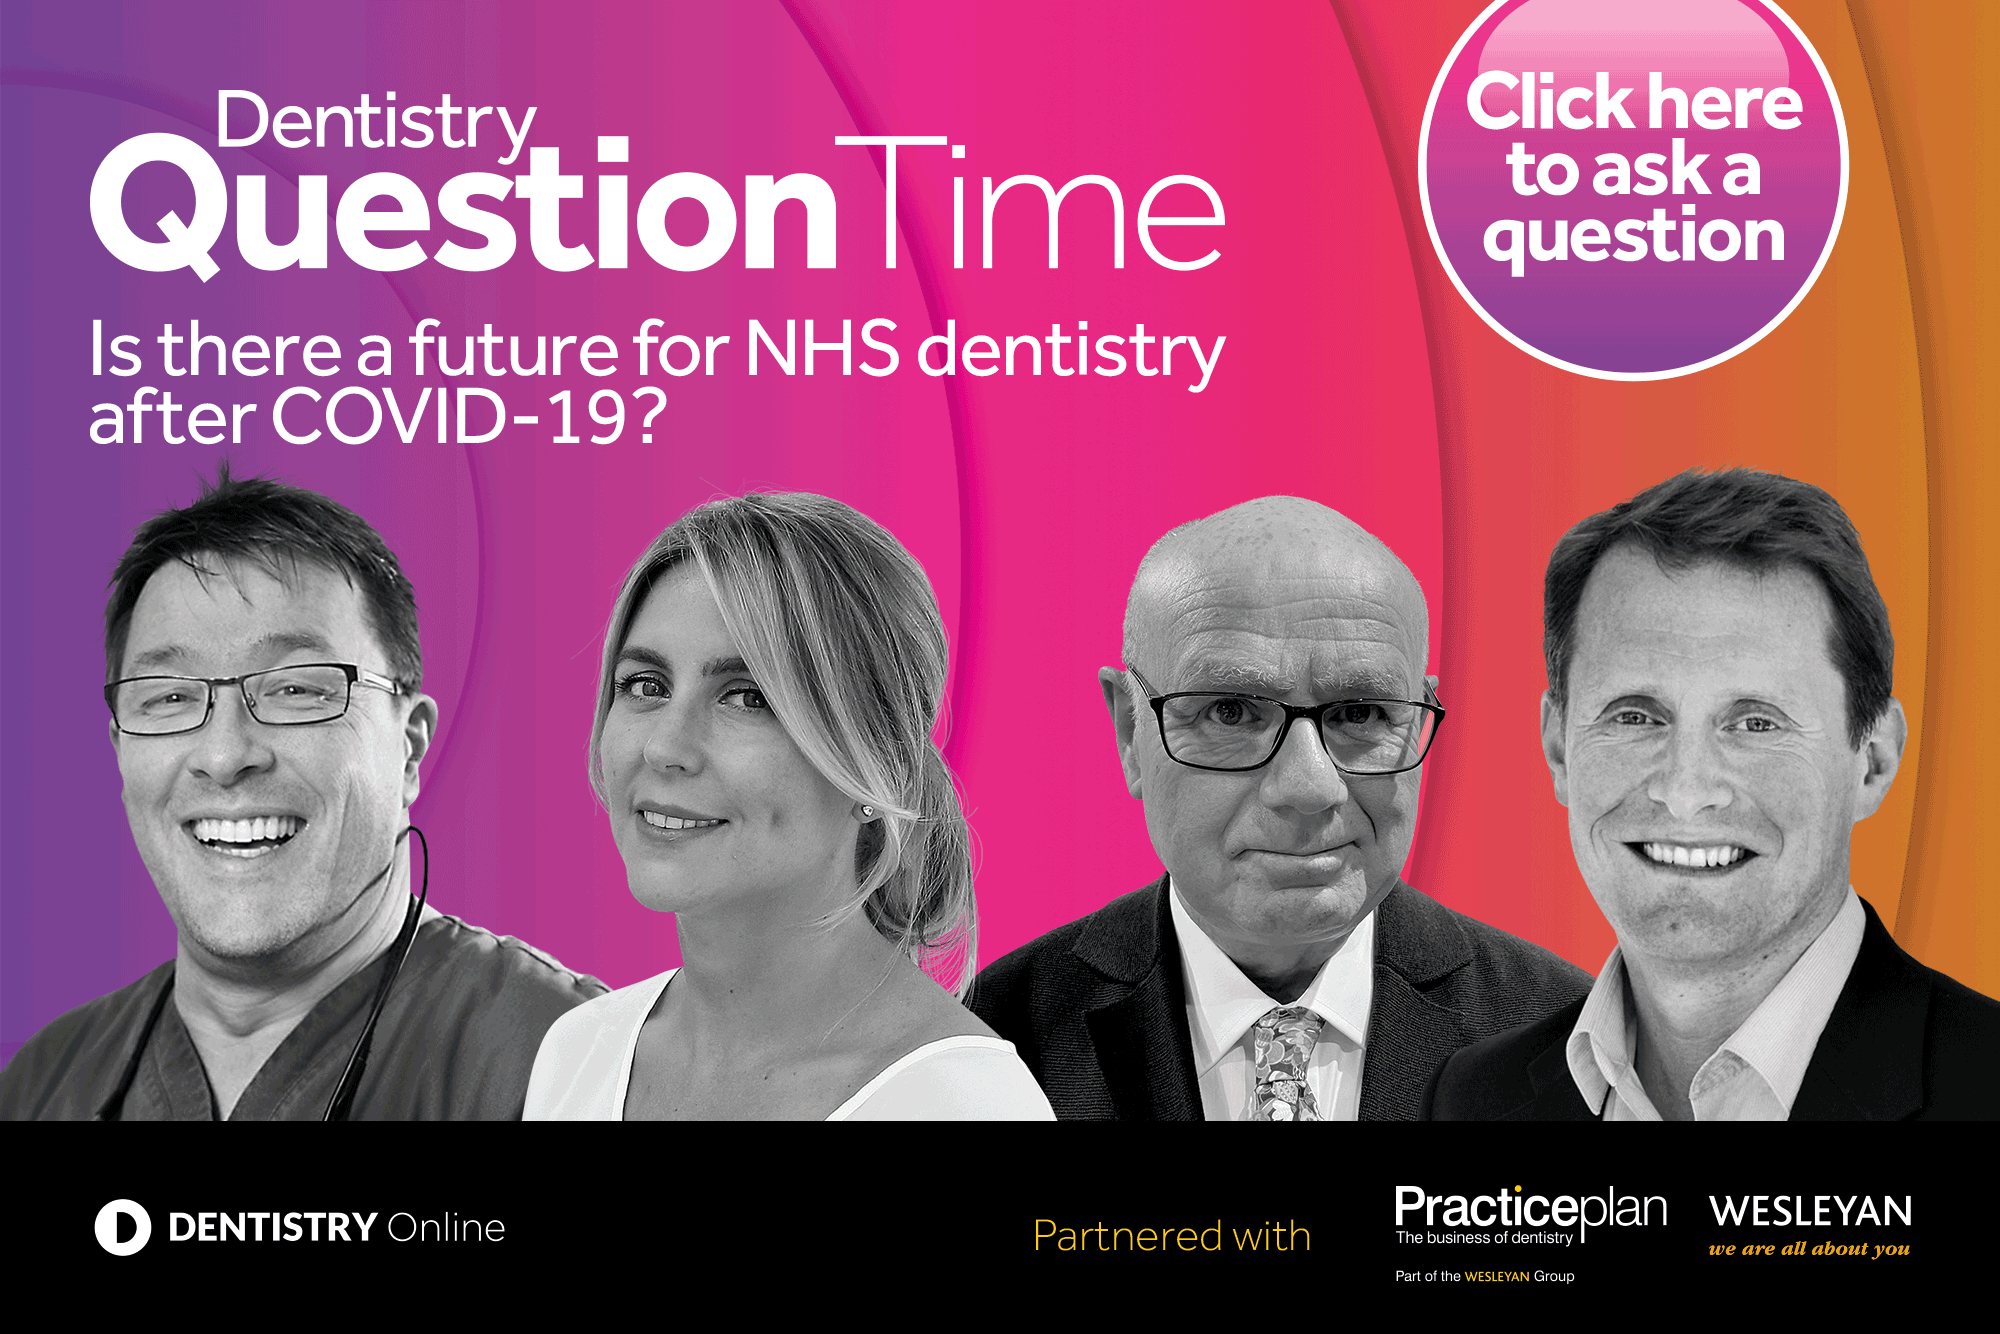 Dentistry Question Time